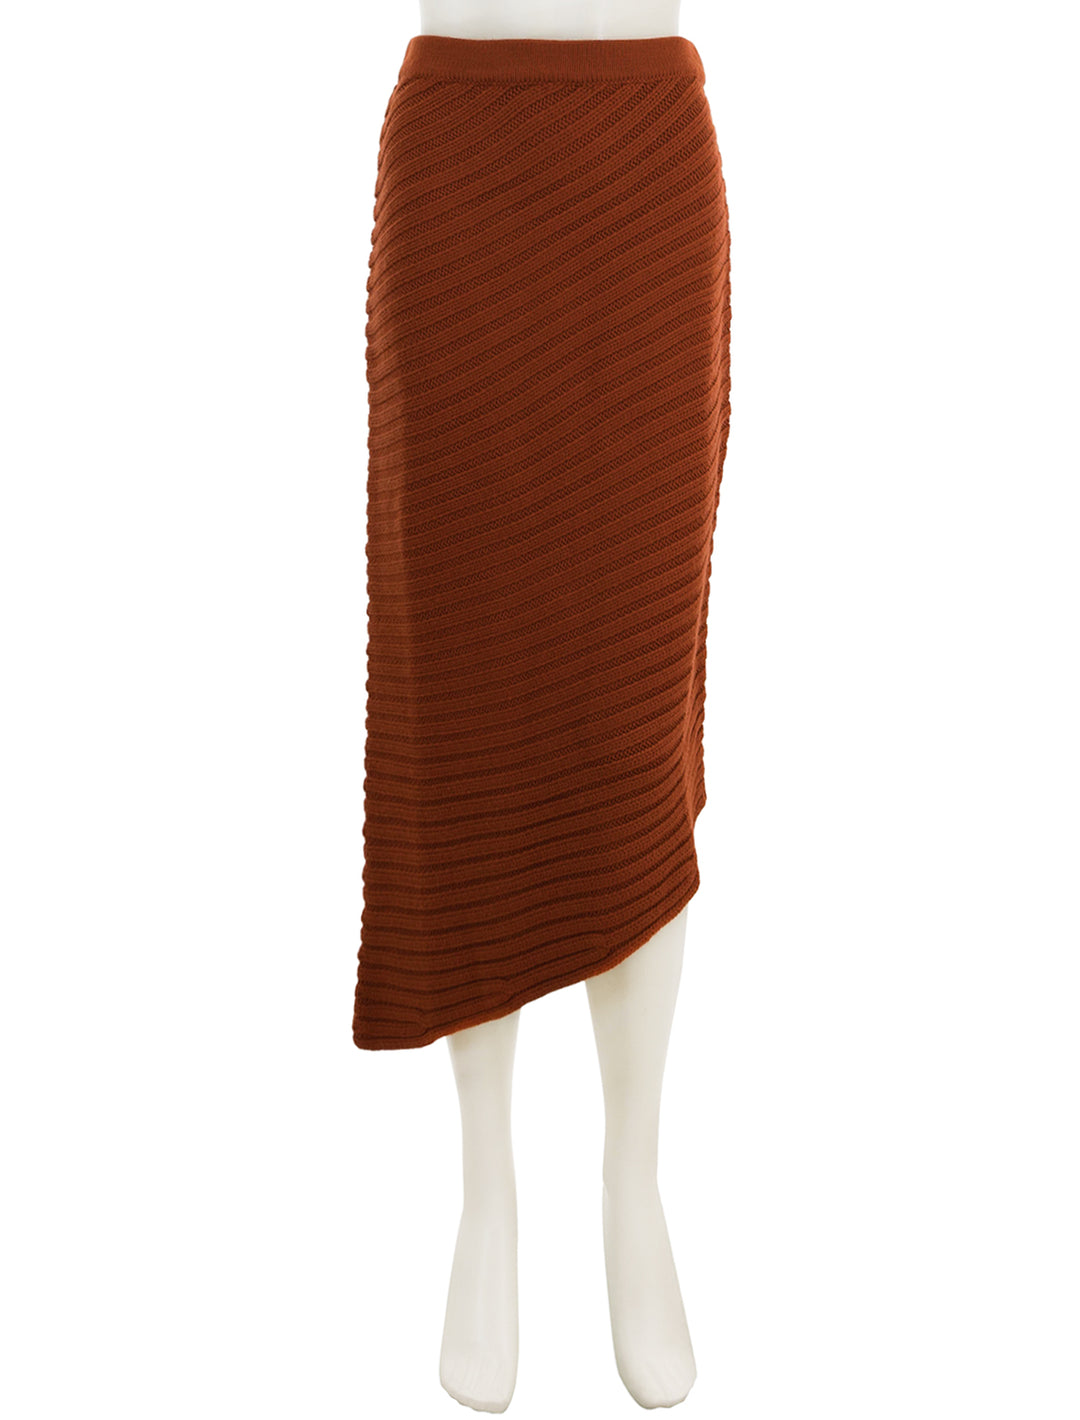 Front view of STAUD's cantilever skirt in cinnamon.